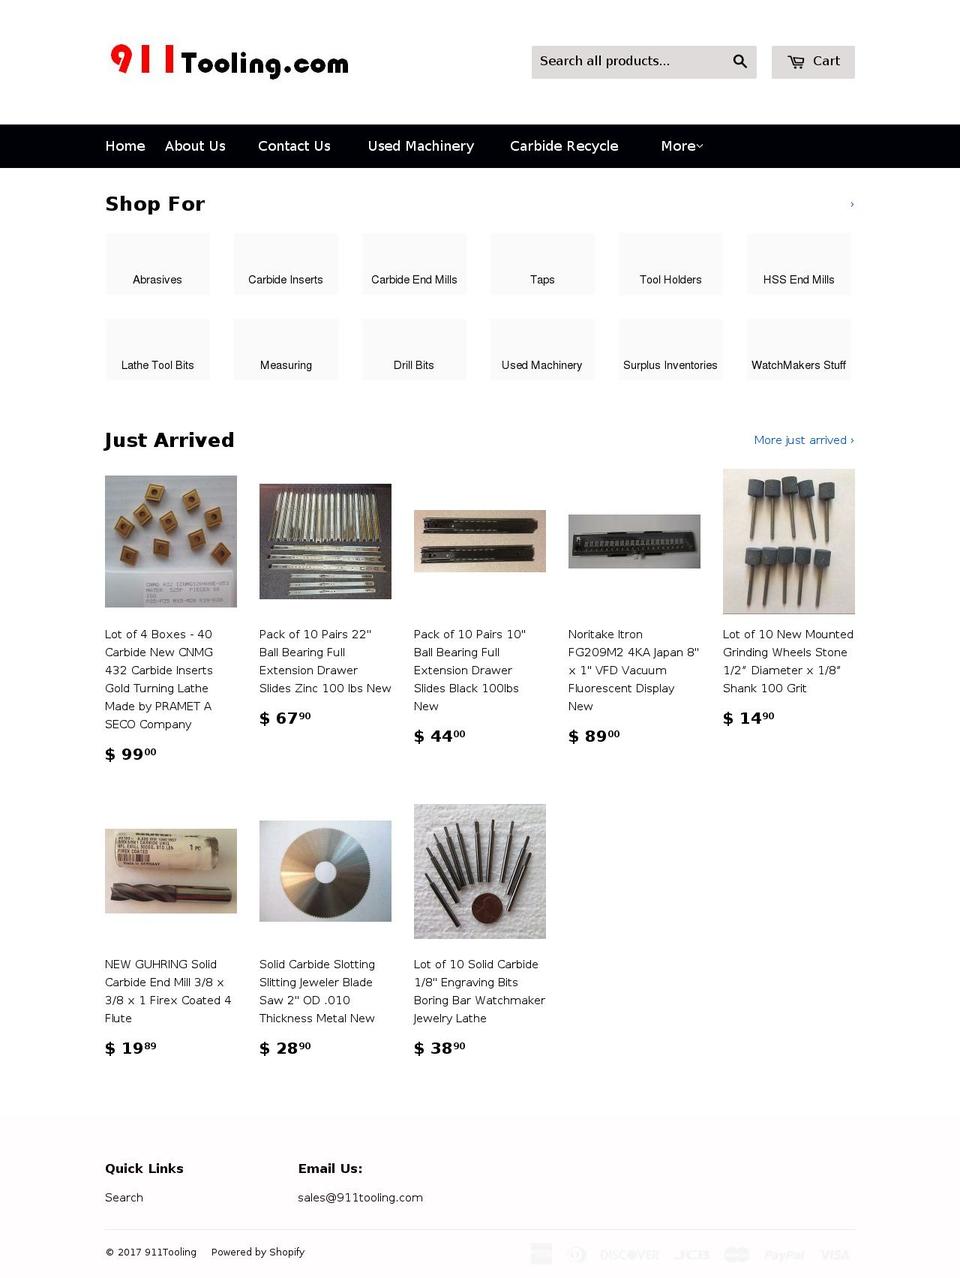 Wokiee Shopify theme site example 911tooling.com